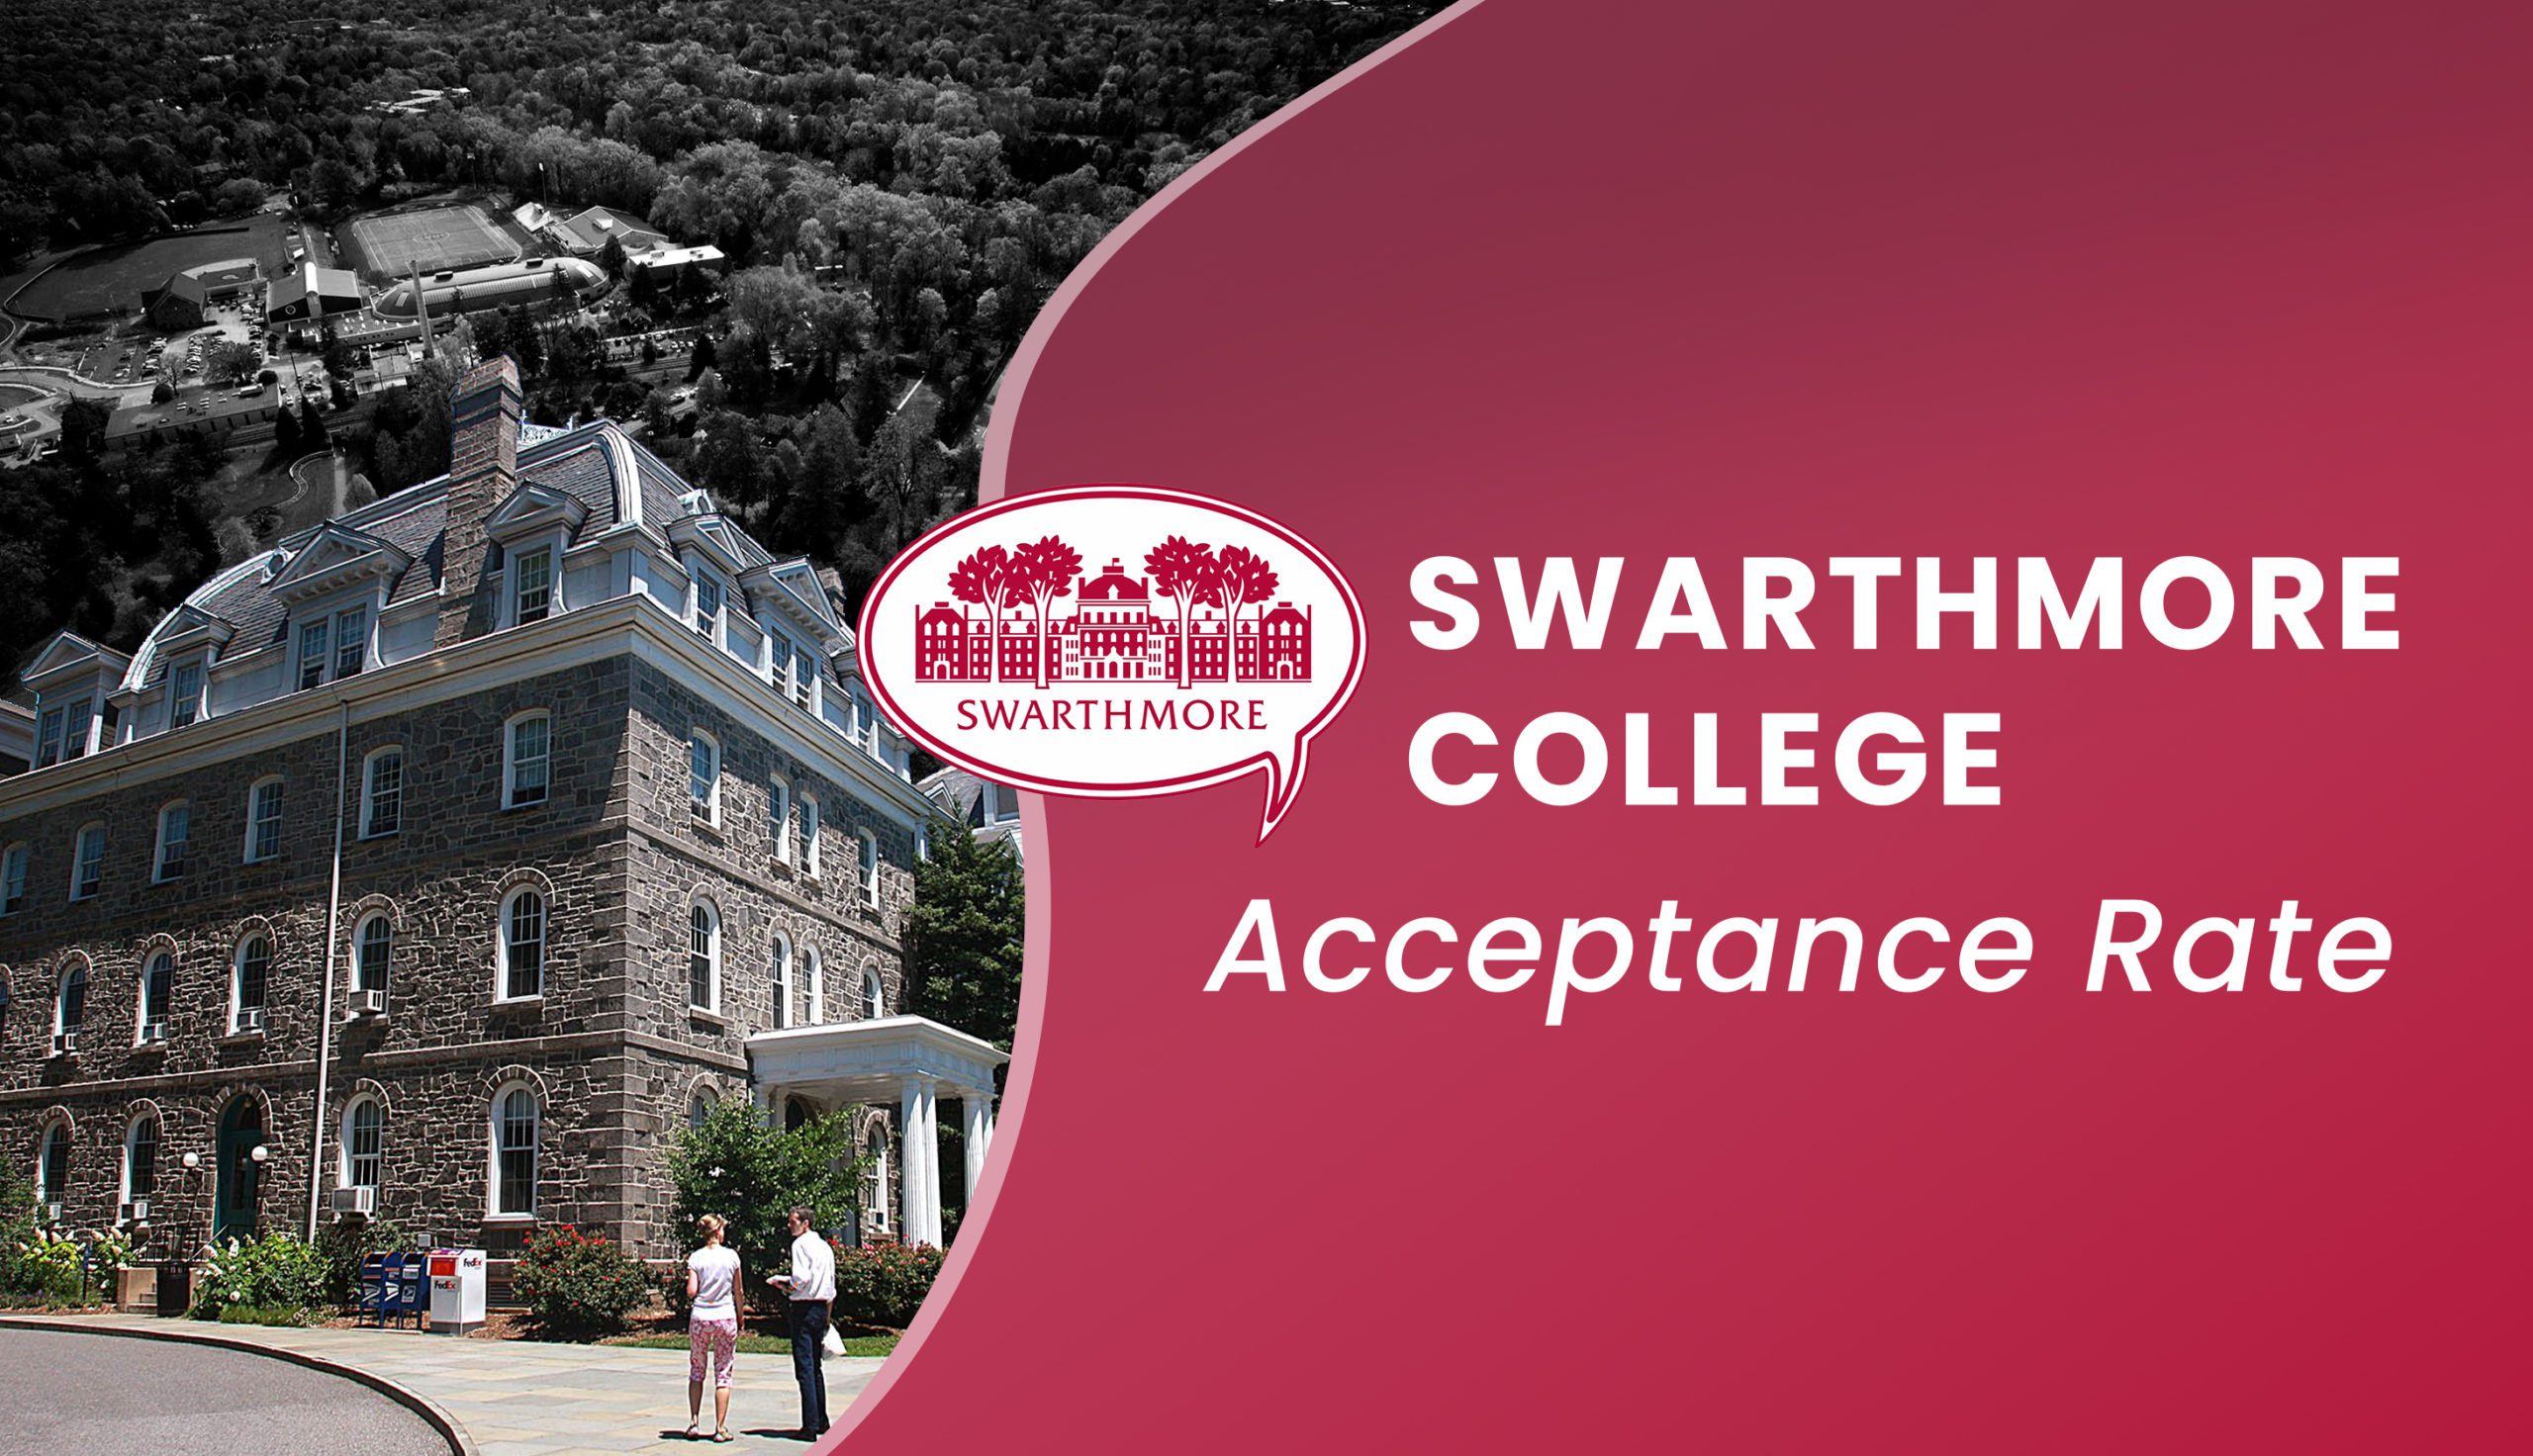 Swarthmore Acceptance Rate & Swarthmore Admissions Best Info